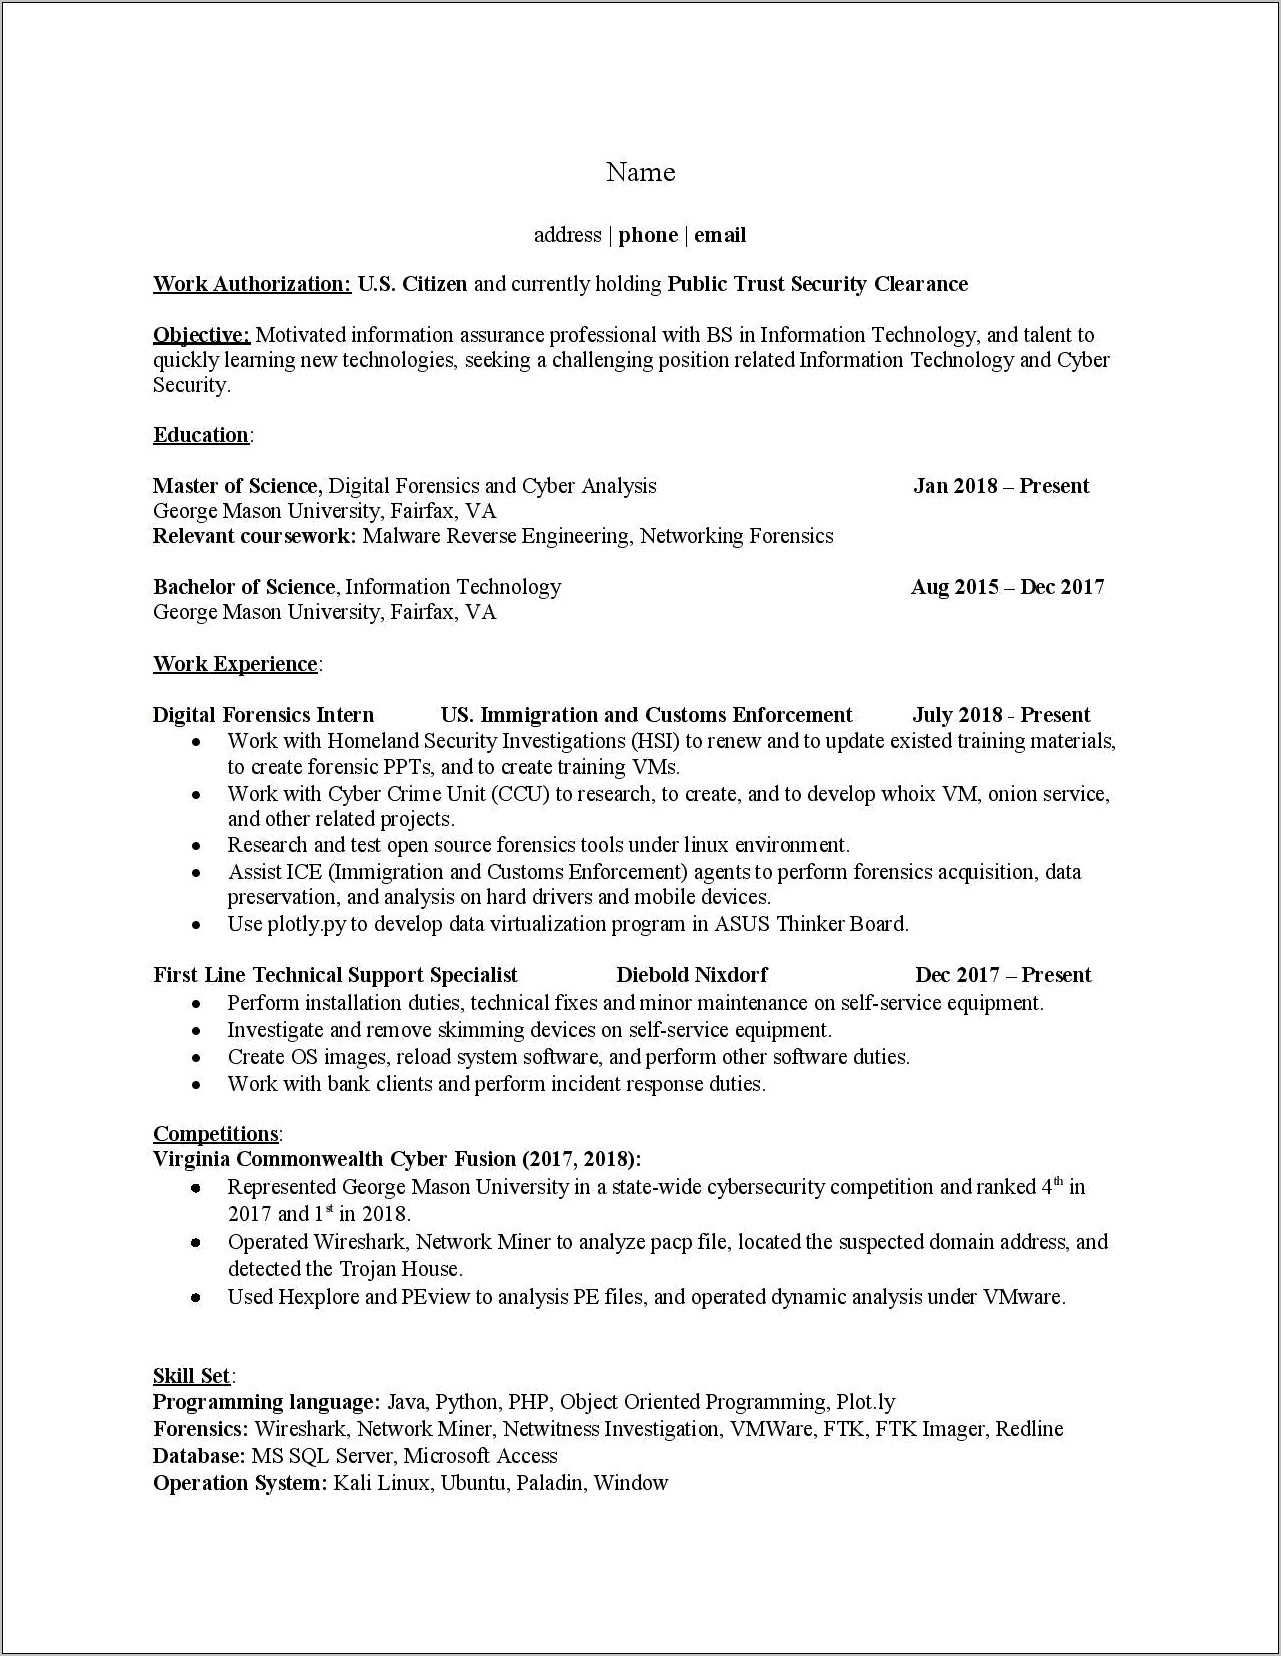 Objective On A Resume For A Miner